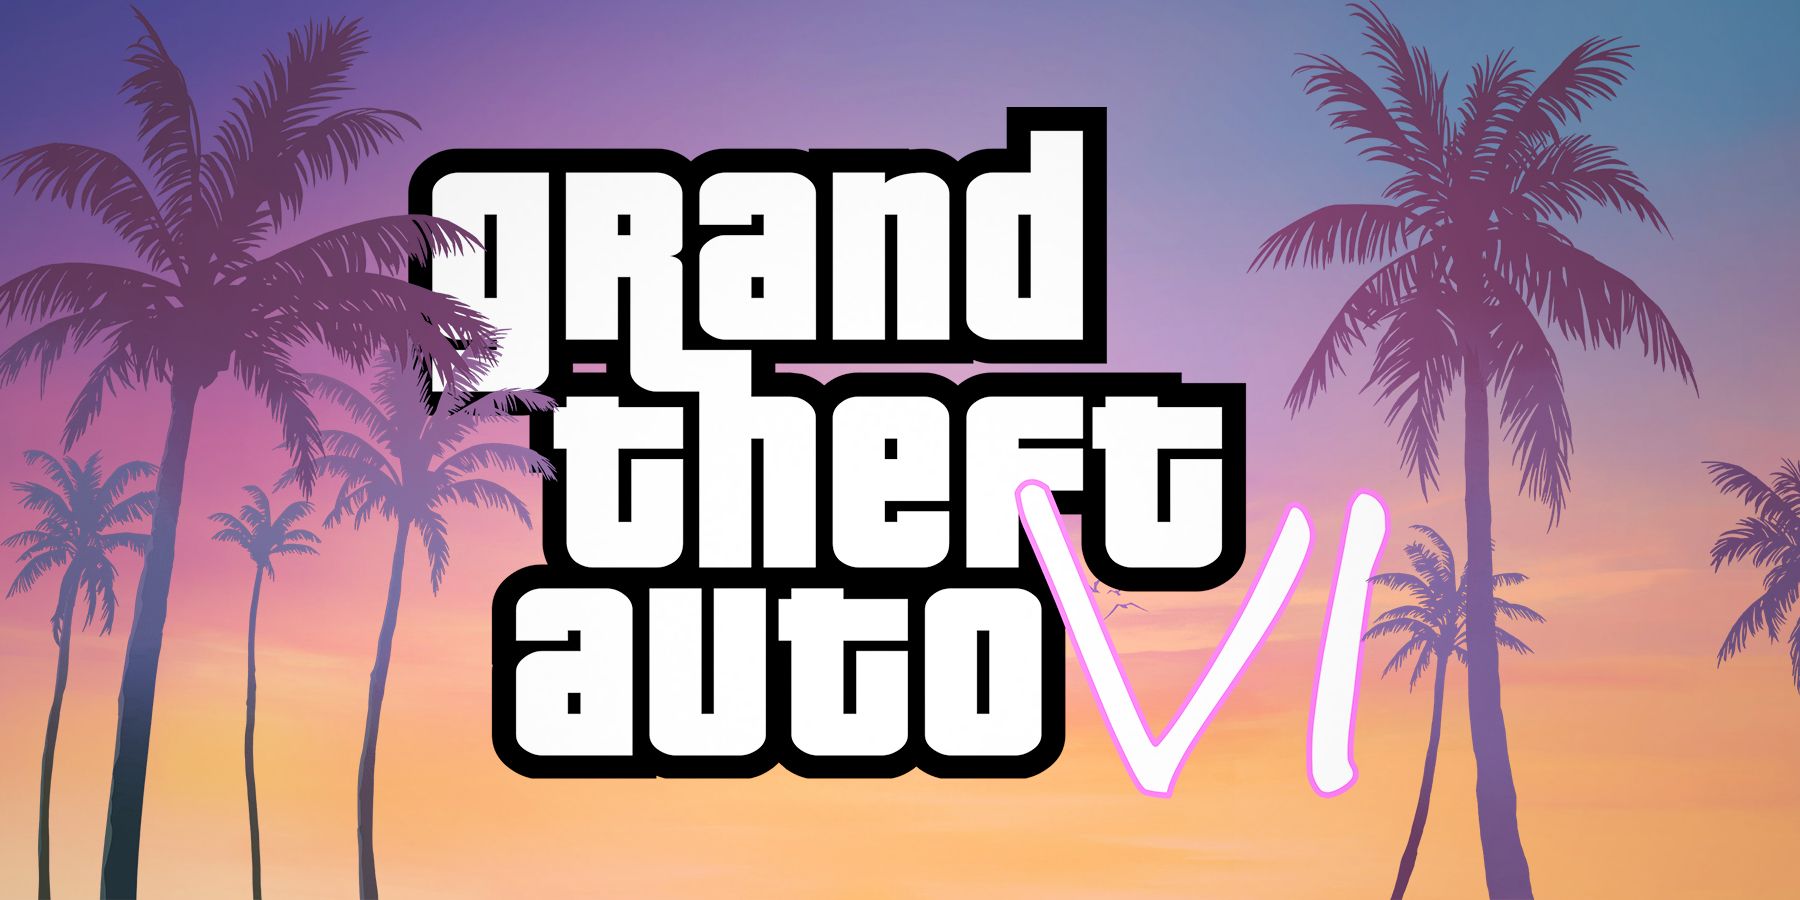 Rockstar Games uploaded a video premiere for the Grand Theft Auto